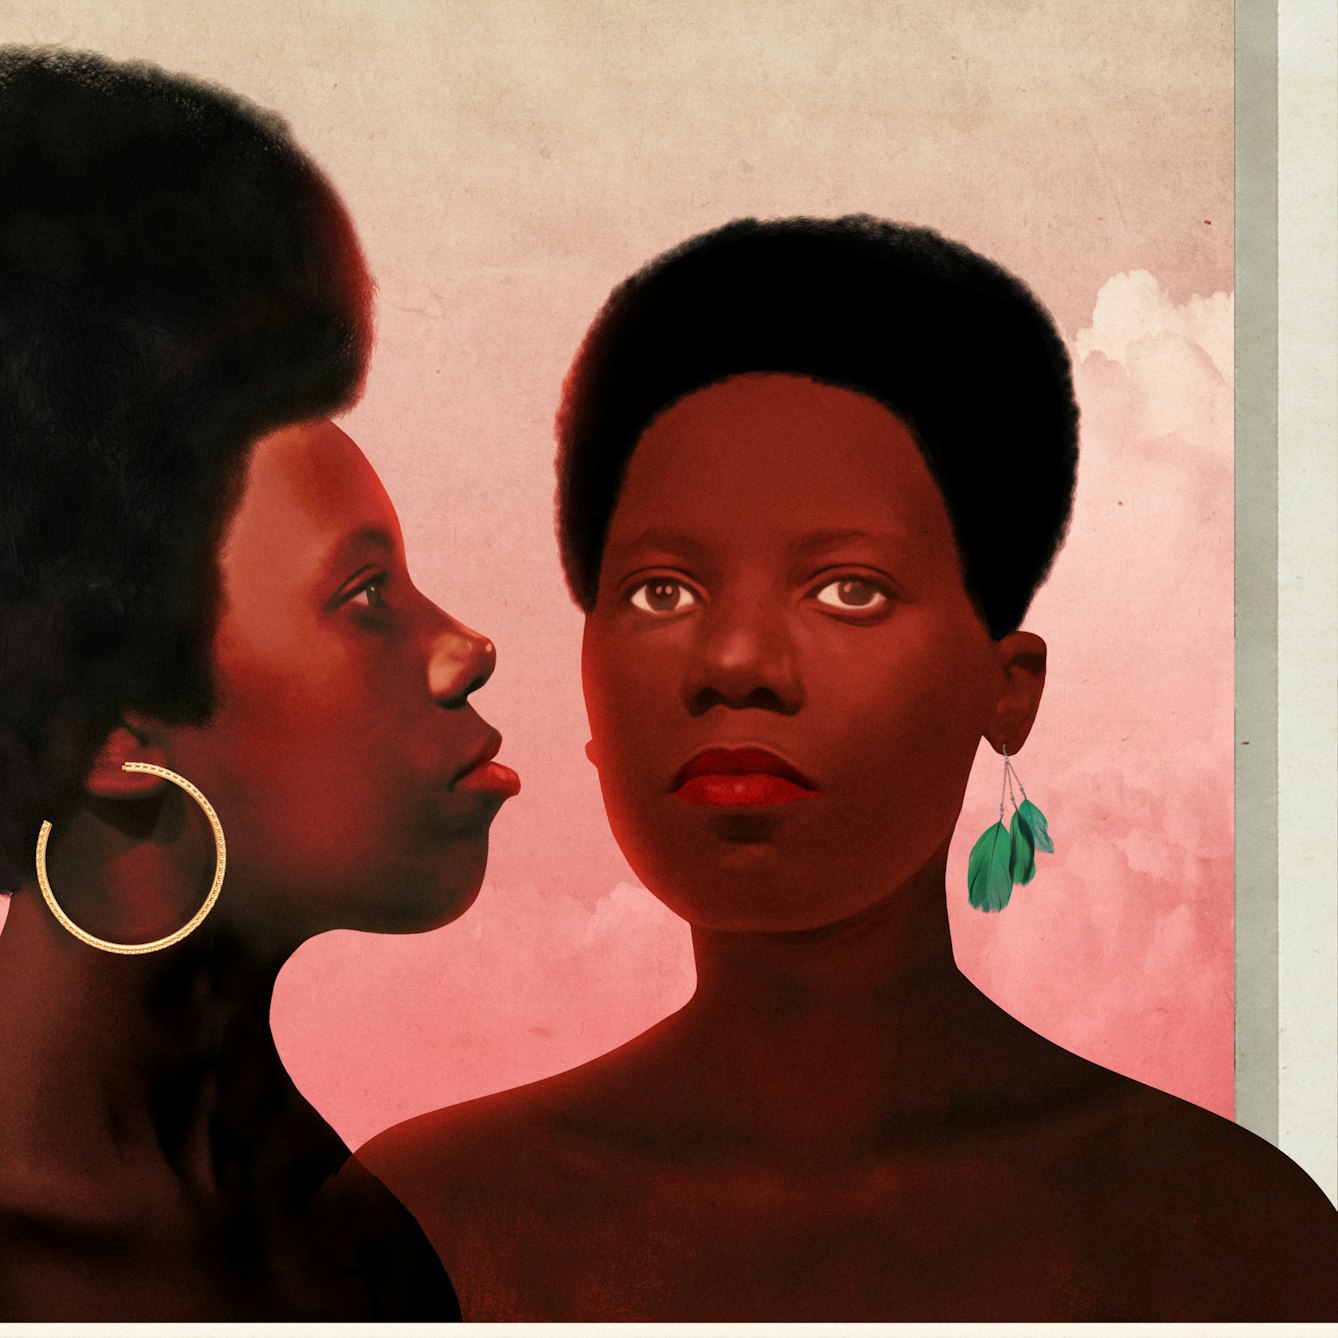 Mixed media digital artwork combining found imagery from vintage magazines and books with painted and textured elements. The overall hues are reds and oranges, with elements of subtle greens. At the centre of the artwork are two young black women pictured from the shoulders up. One is looking straight out at the viewer with an earring in her left ear made up of a cluster of hanging green feathers. The other woman, placed to the left is pictured in profile looking towards the right. She has a large golden hooped earring in her right ear. They both have a strong confident expression on their faces. Behind them is a graduated pink and yellow/green sky containing fluffy clouds. They are both set within a square bevelled frame. To the left side of the women is a seascape with a forearm thrusting vertically out of the water. The fist is clenched, holding the body of a snake which wraps around the forearm. The head of the snake cannot be seen. In the sky above the fist are two moon-like orbs overlapping each other, both are a vibrant red colour. To the right side of the women is a monotone nighttime seascape with a yellow/green hue. In the sky is a diagram of the sun showing how the rays of light illuminate the orbiting moon and the shadows cast on the earth. The diagram is reflected in the water of the sea.